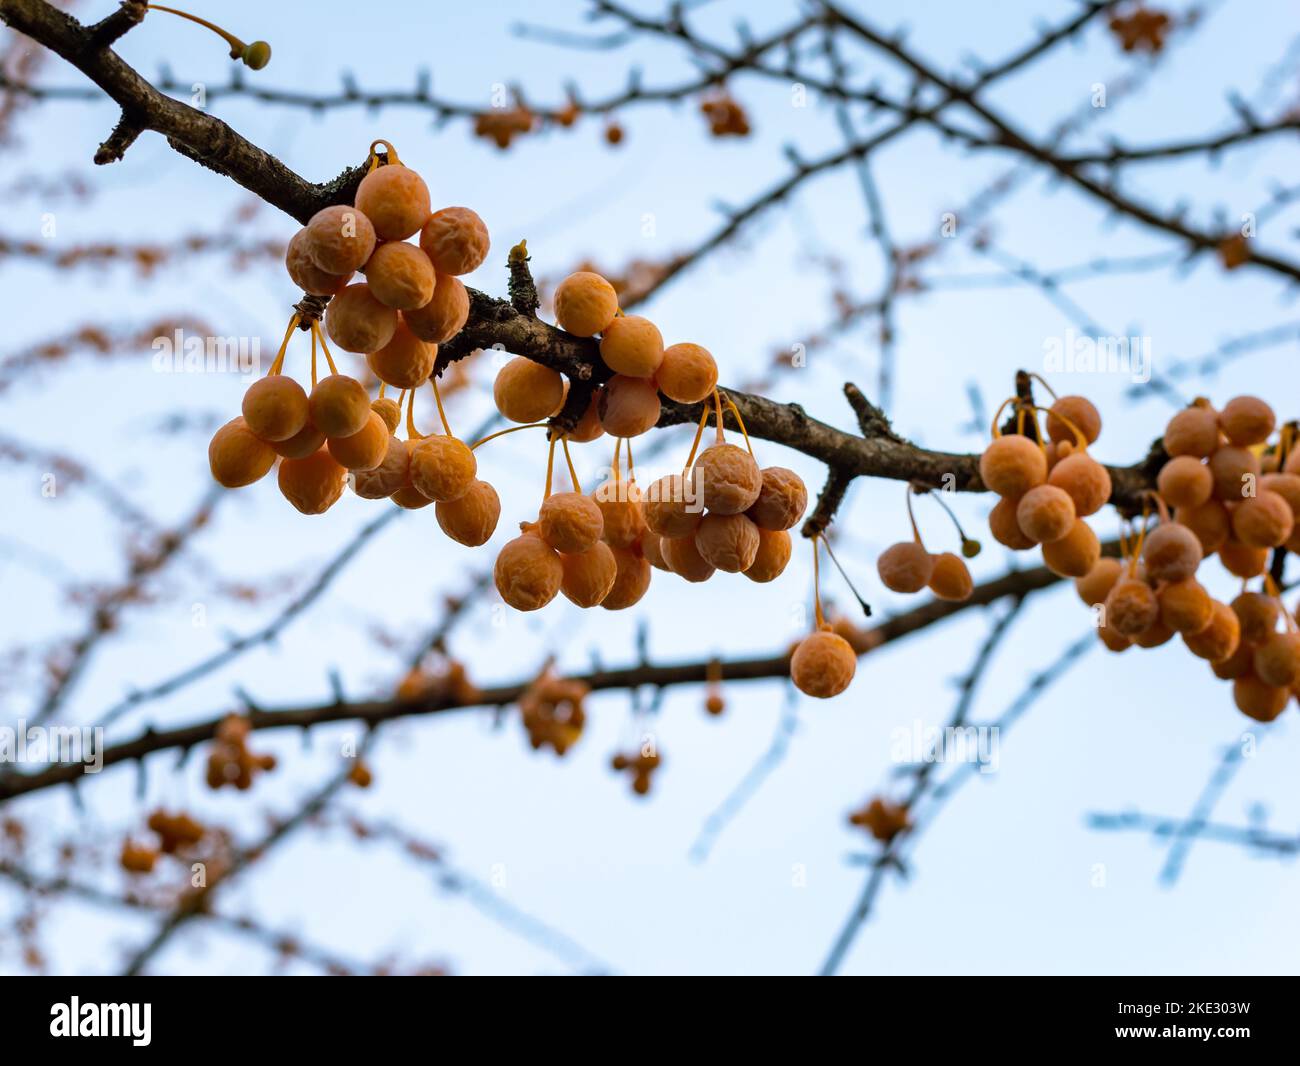 Fruits of a Ginkgo tree are ripe and hanging on a thin twig. Close-up of the orange nuts from a plant in Germany. Looking up to the branch. Stock Photo